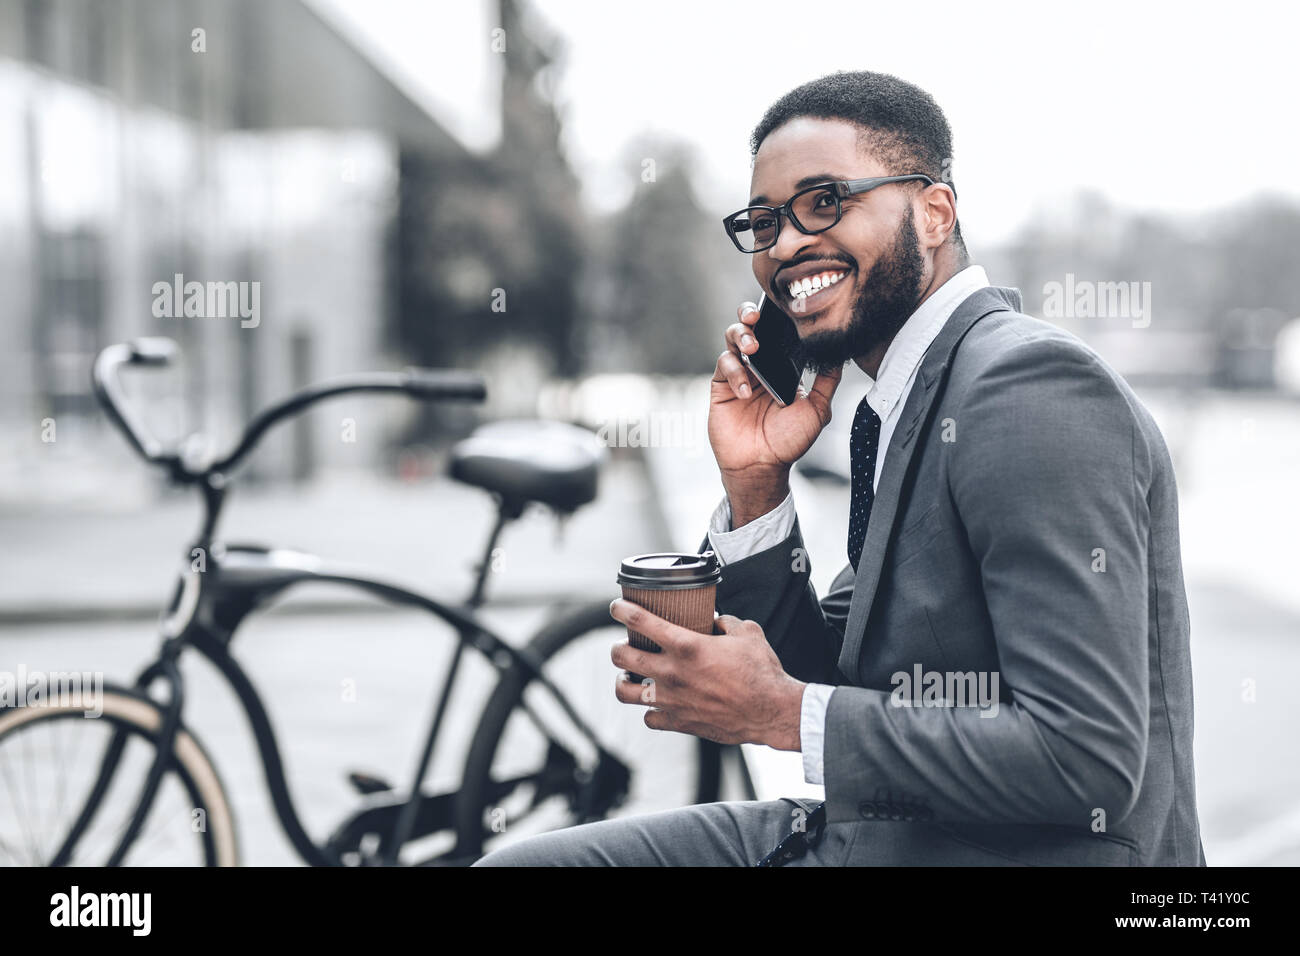 No time for break. Millennial businessman talking on phone Stock Photo